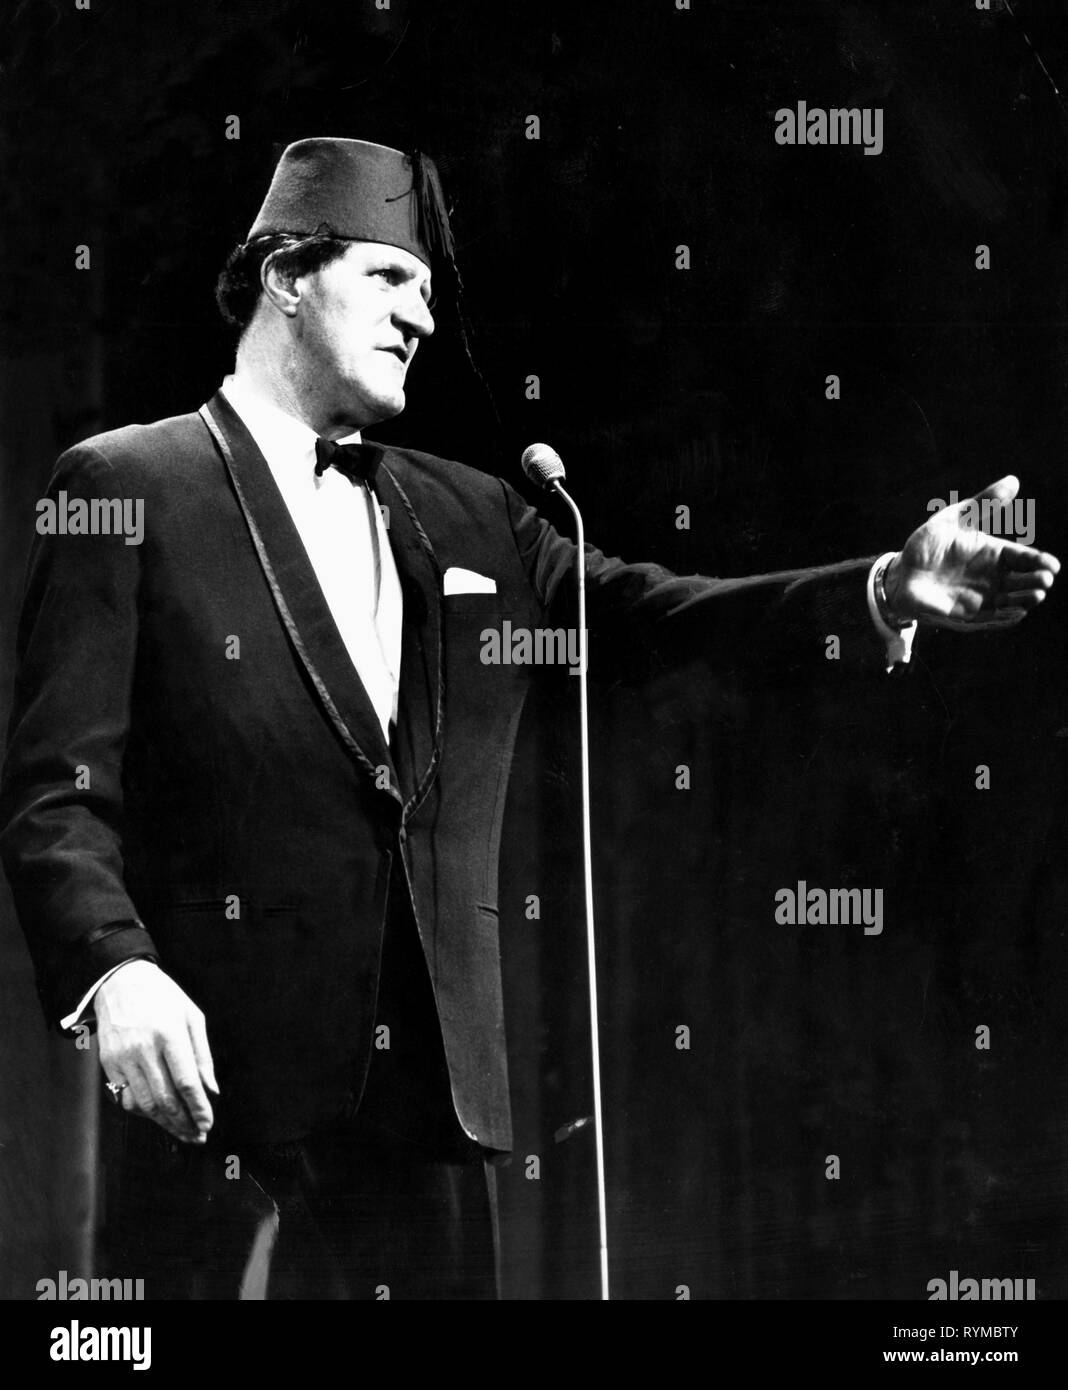 Image of Tommy Cooper, c. 1980 (photo)